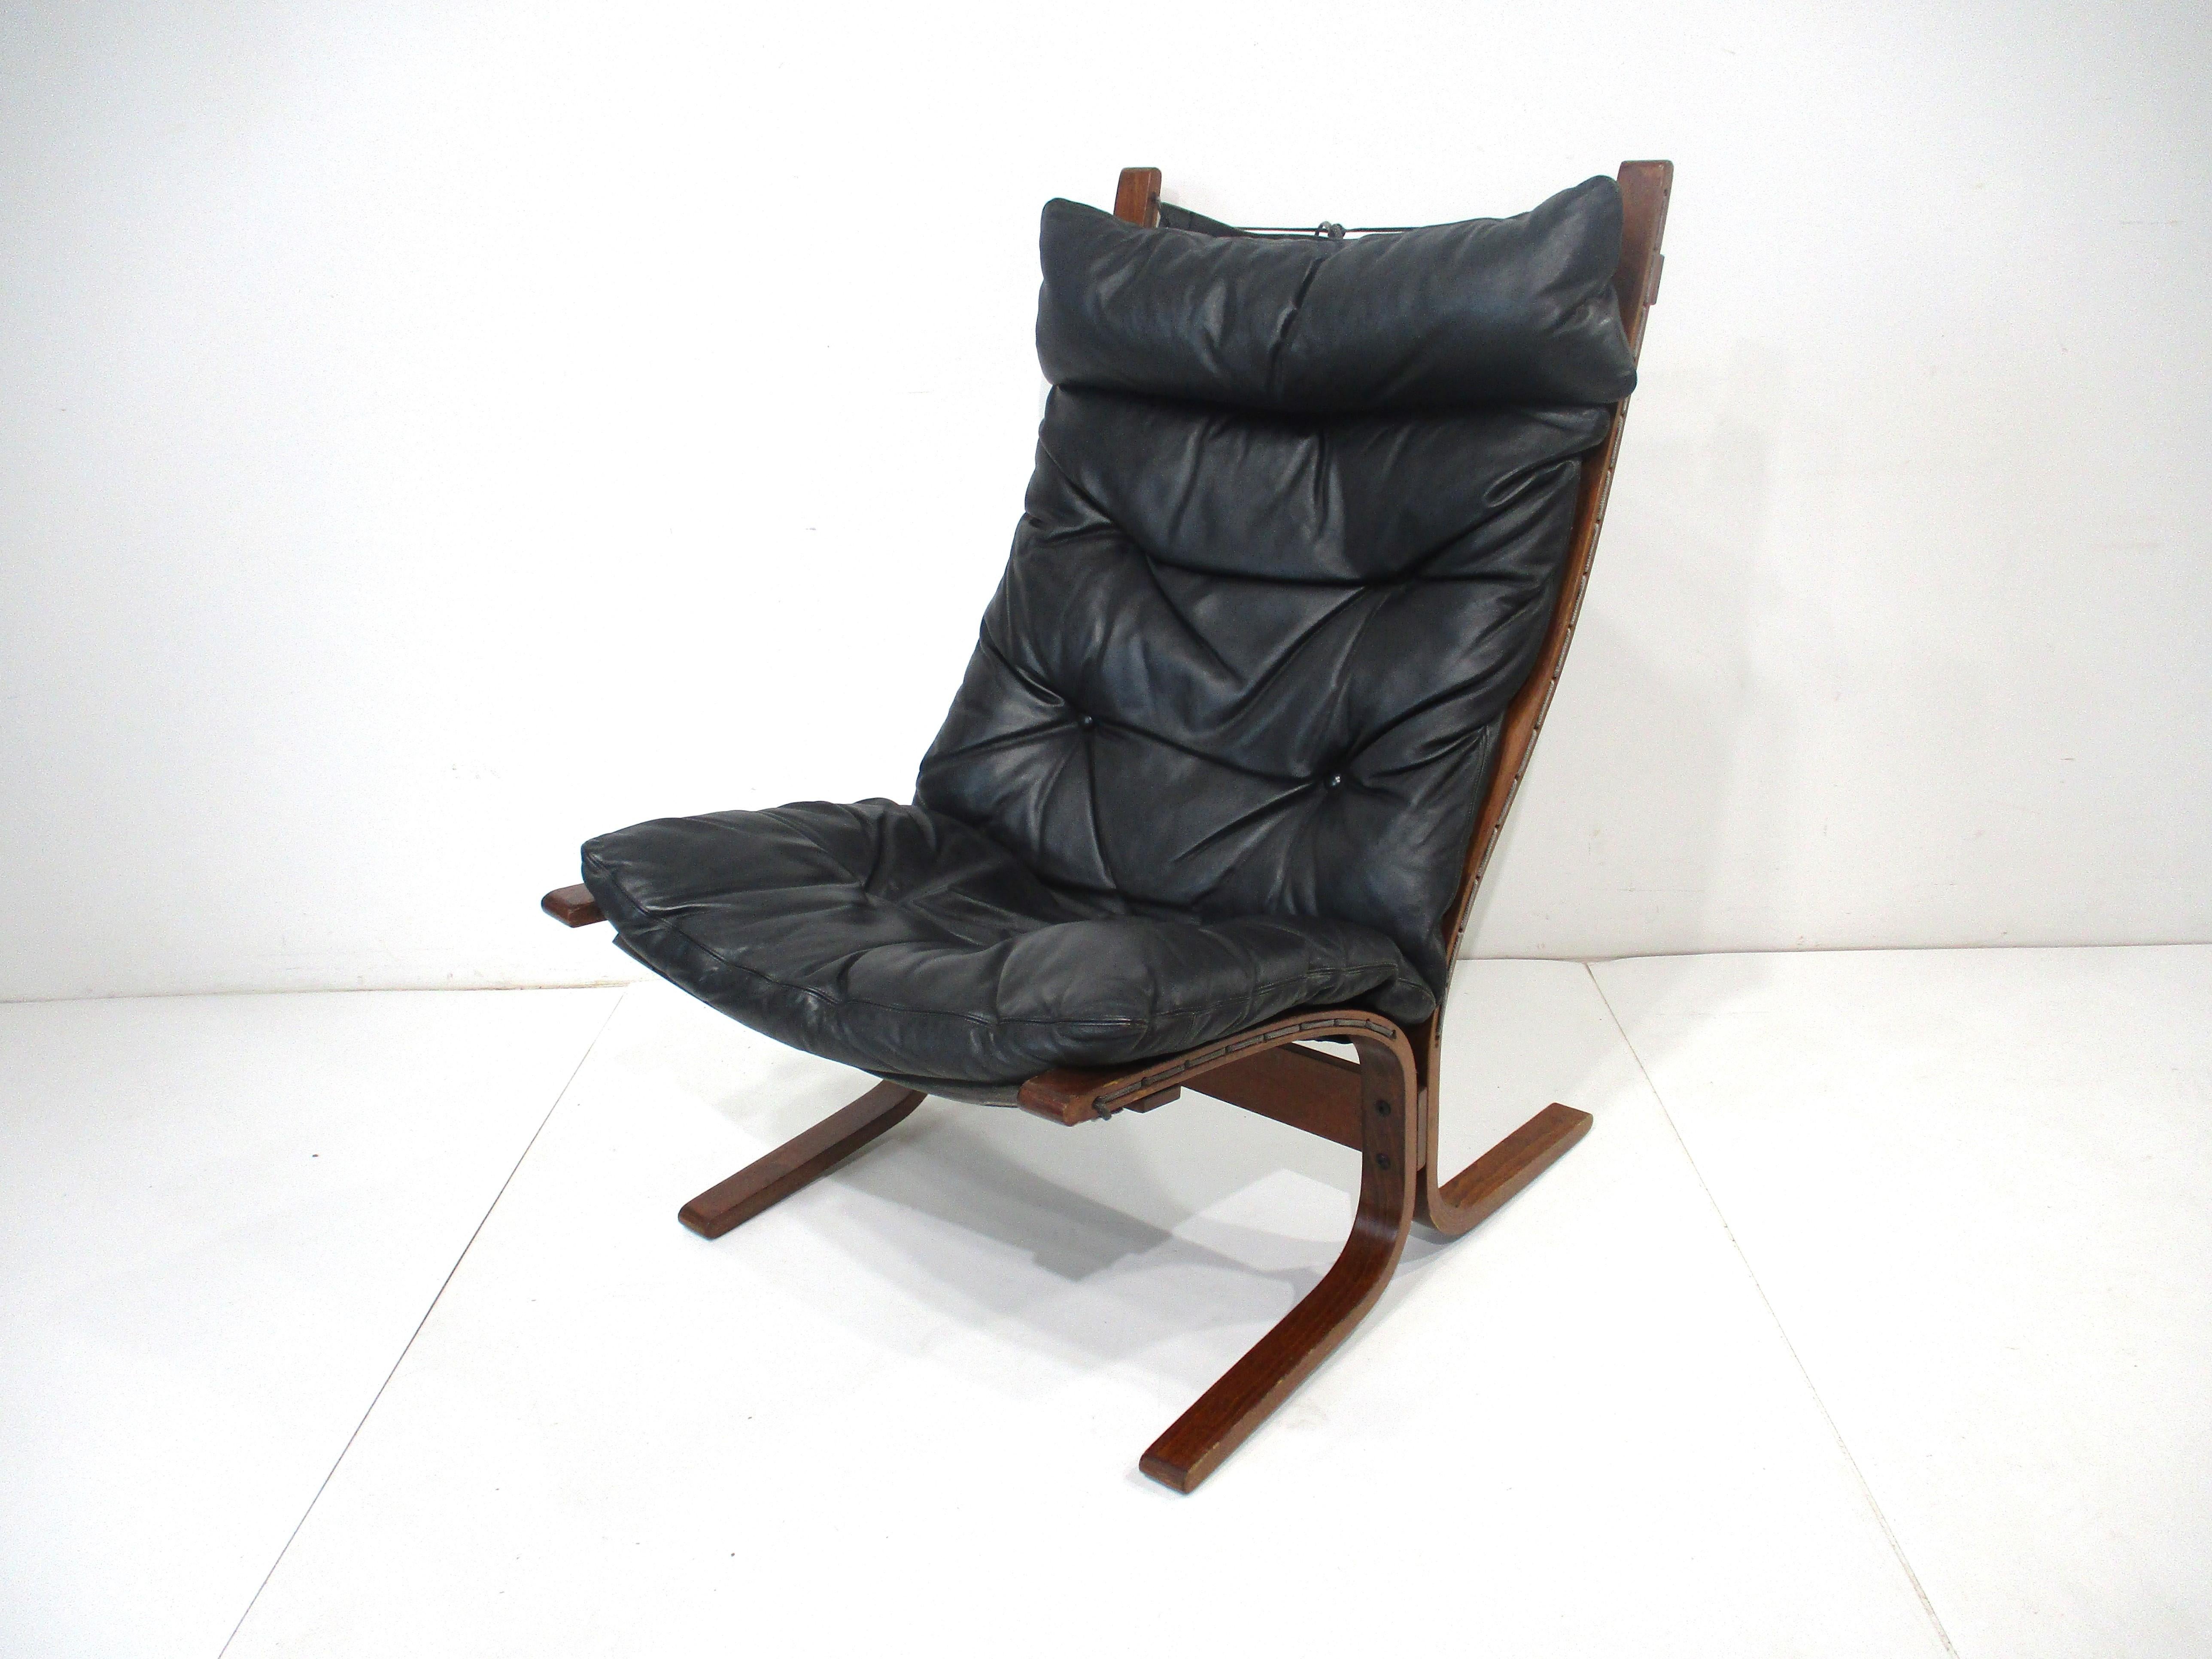 A black leather and rosewood toned bentwood cantilevered Siesta lounge chair with canvas sling styled back for comfort . A simple design coming from the Mid Century Danish modern period designed by Ingmar Relling for the Westnofa furniture company